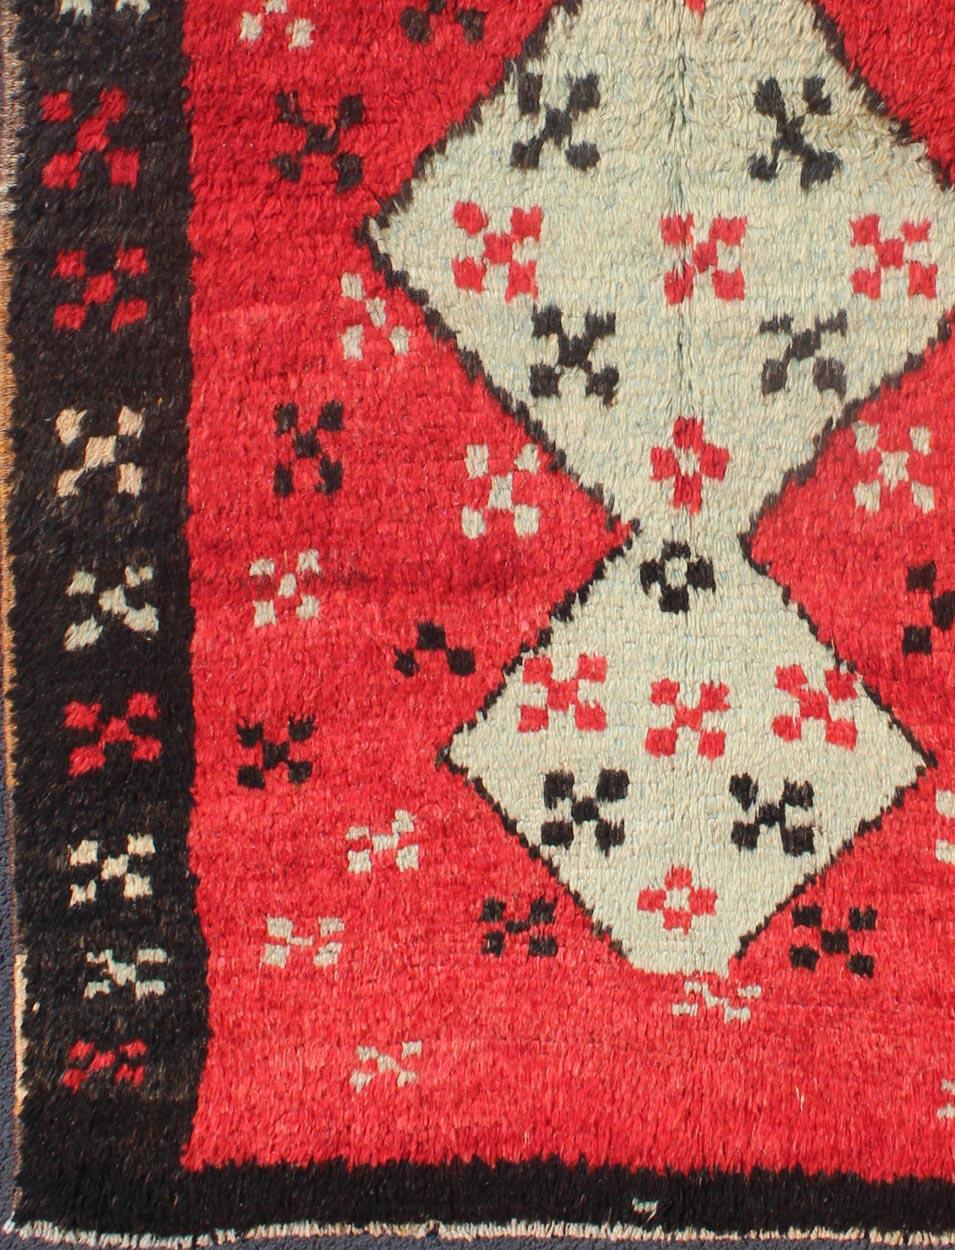 Midcentury Turkish Tulu rug with diamond design in beautiful red, Ivory, and dark brown/ black color border, rug EN-304, country of origin / type: Turkey / Tulu, circa 1940.

This midcentury Tulu carpet contains diamond shapes laid across a